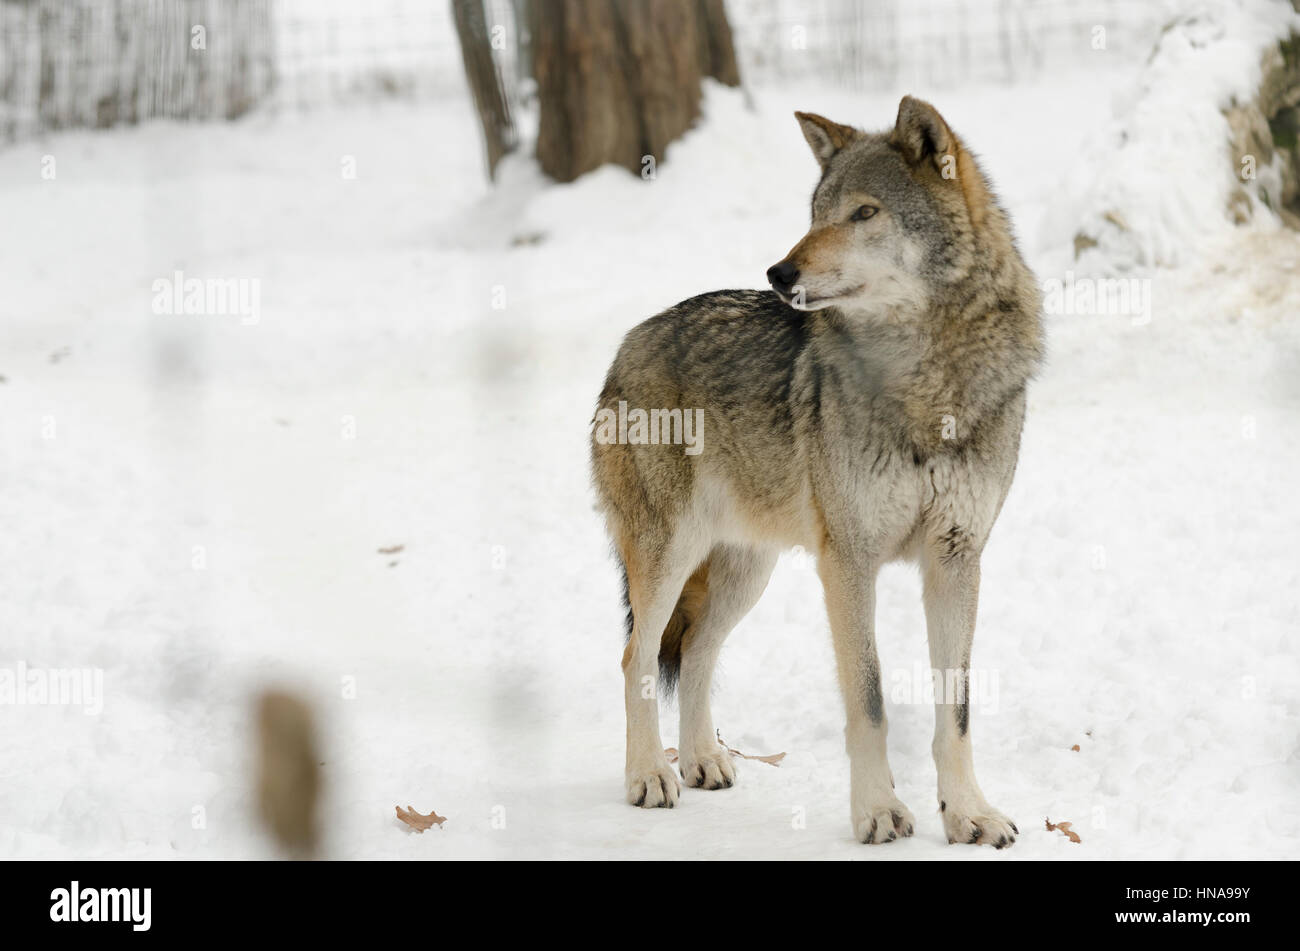 Free Images : wildlife, nature, snow, wild, furry, predator, winter, red fox,  carnivore, whiskers, fawn, terrestrial animal, kit fox, Swift fox, dog  breed, snout, dhole, fur, canidae, tail, natural landscape, red wolf